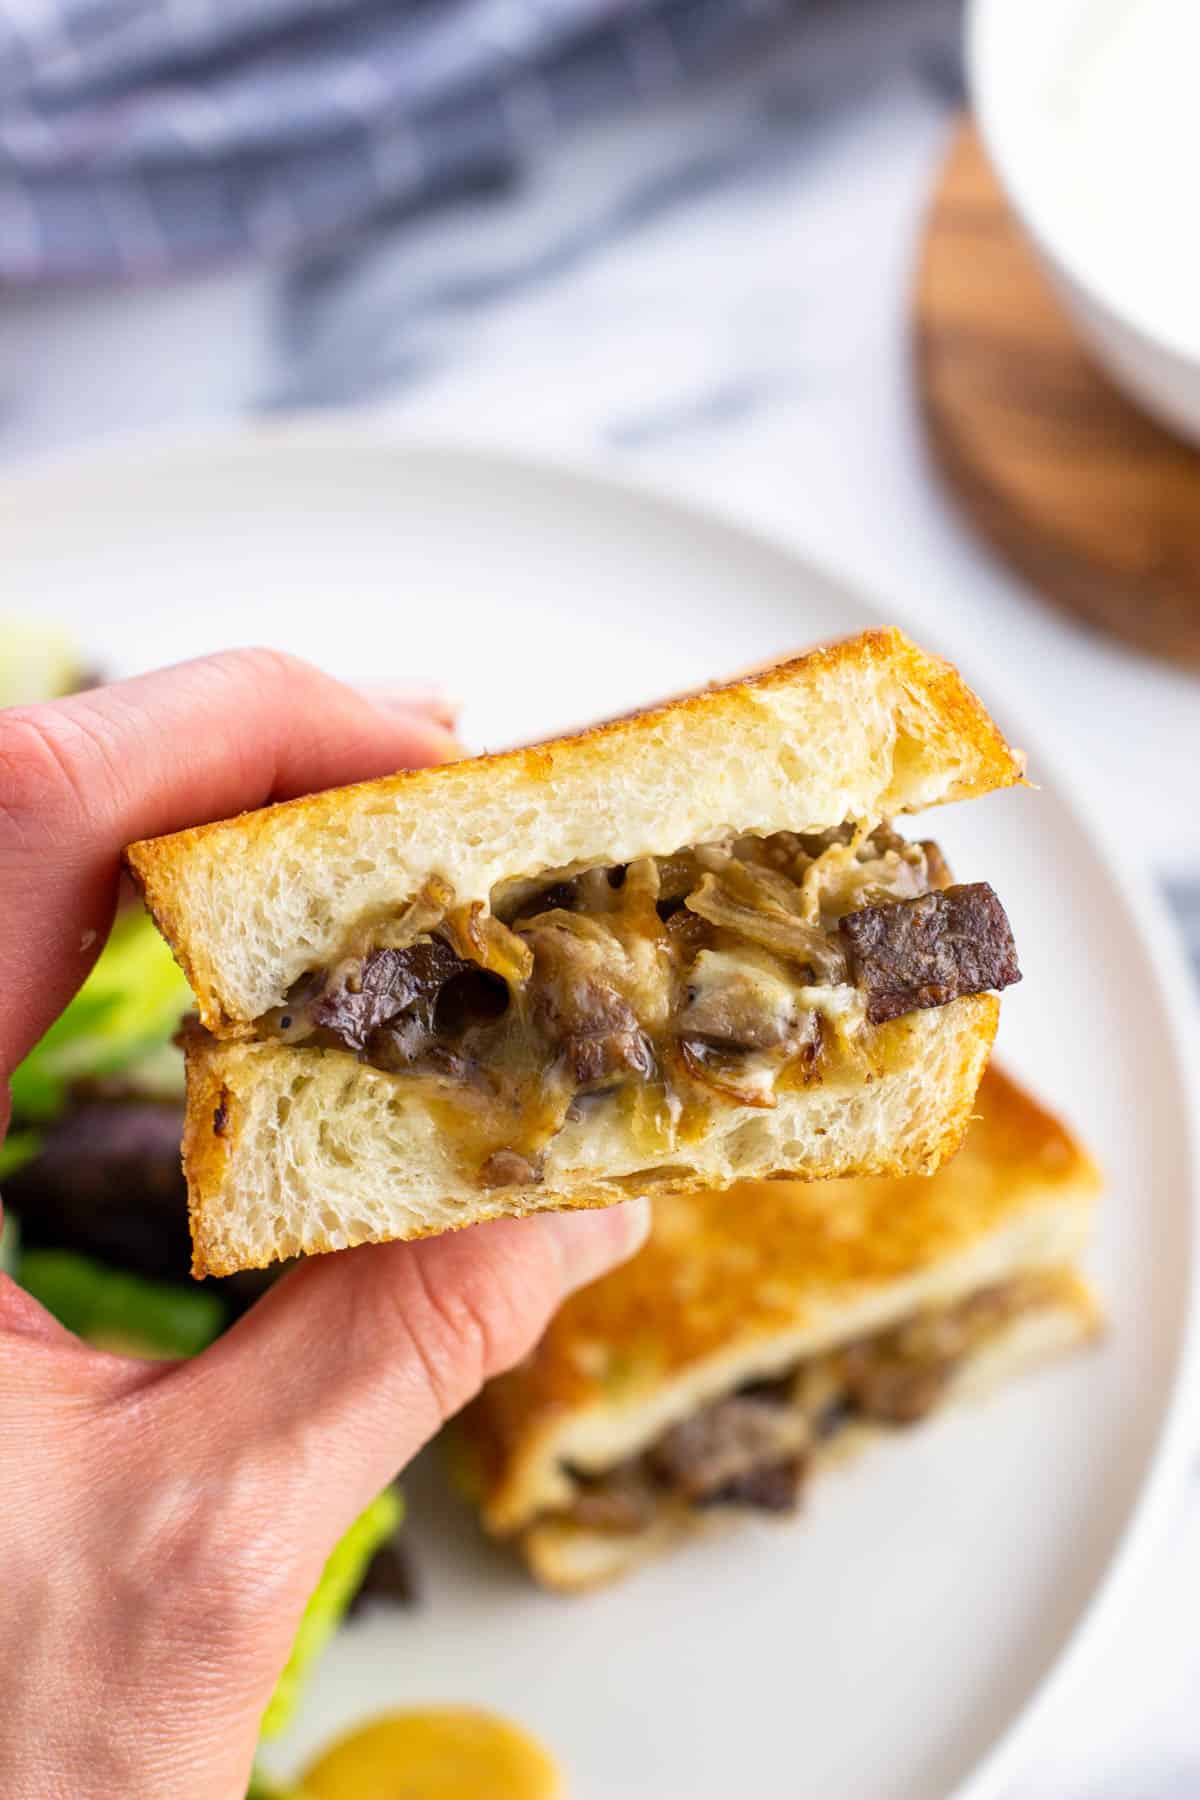 A hand holding up half of a leftover steak sandwich.